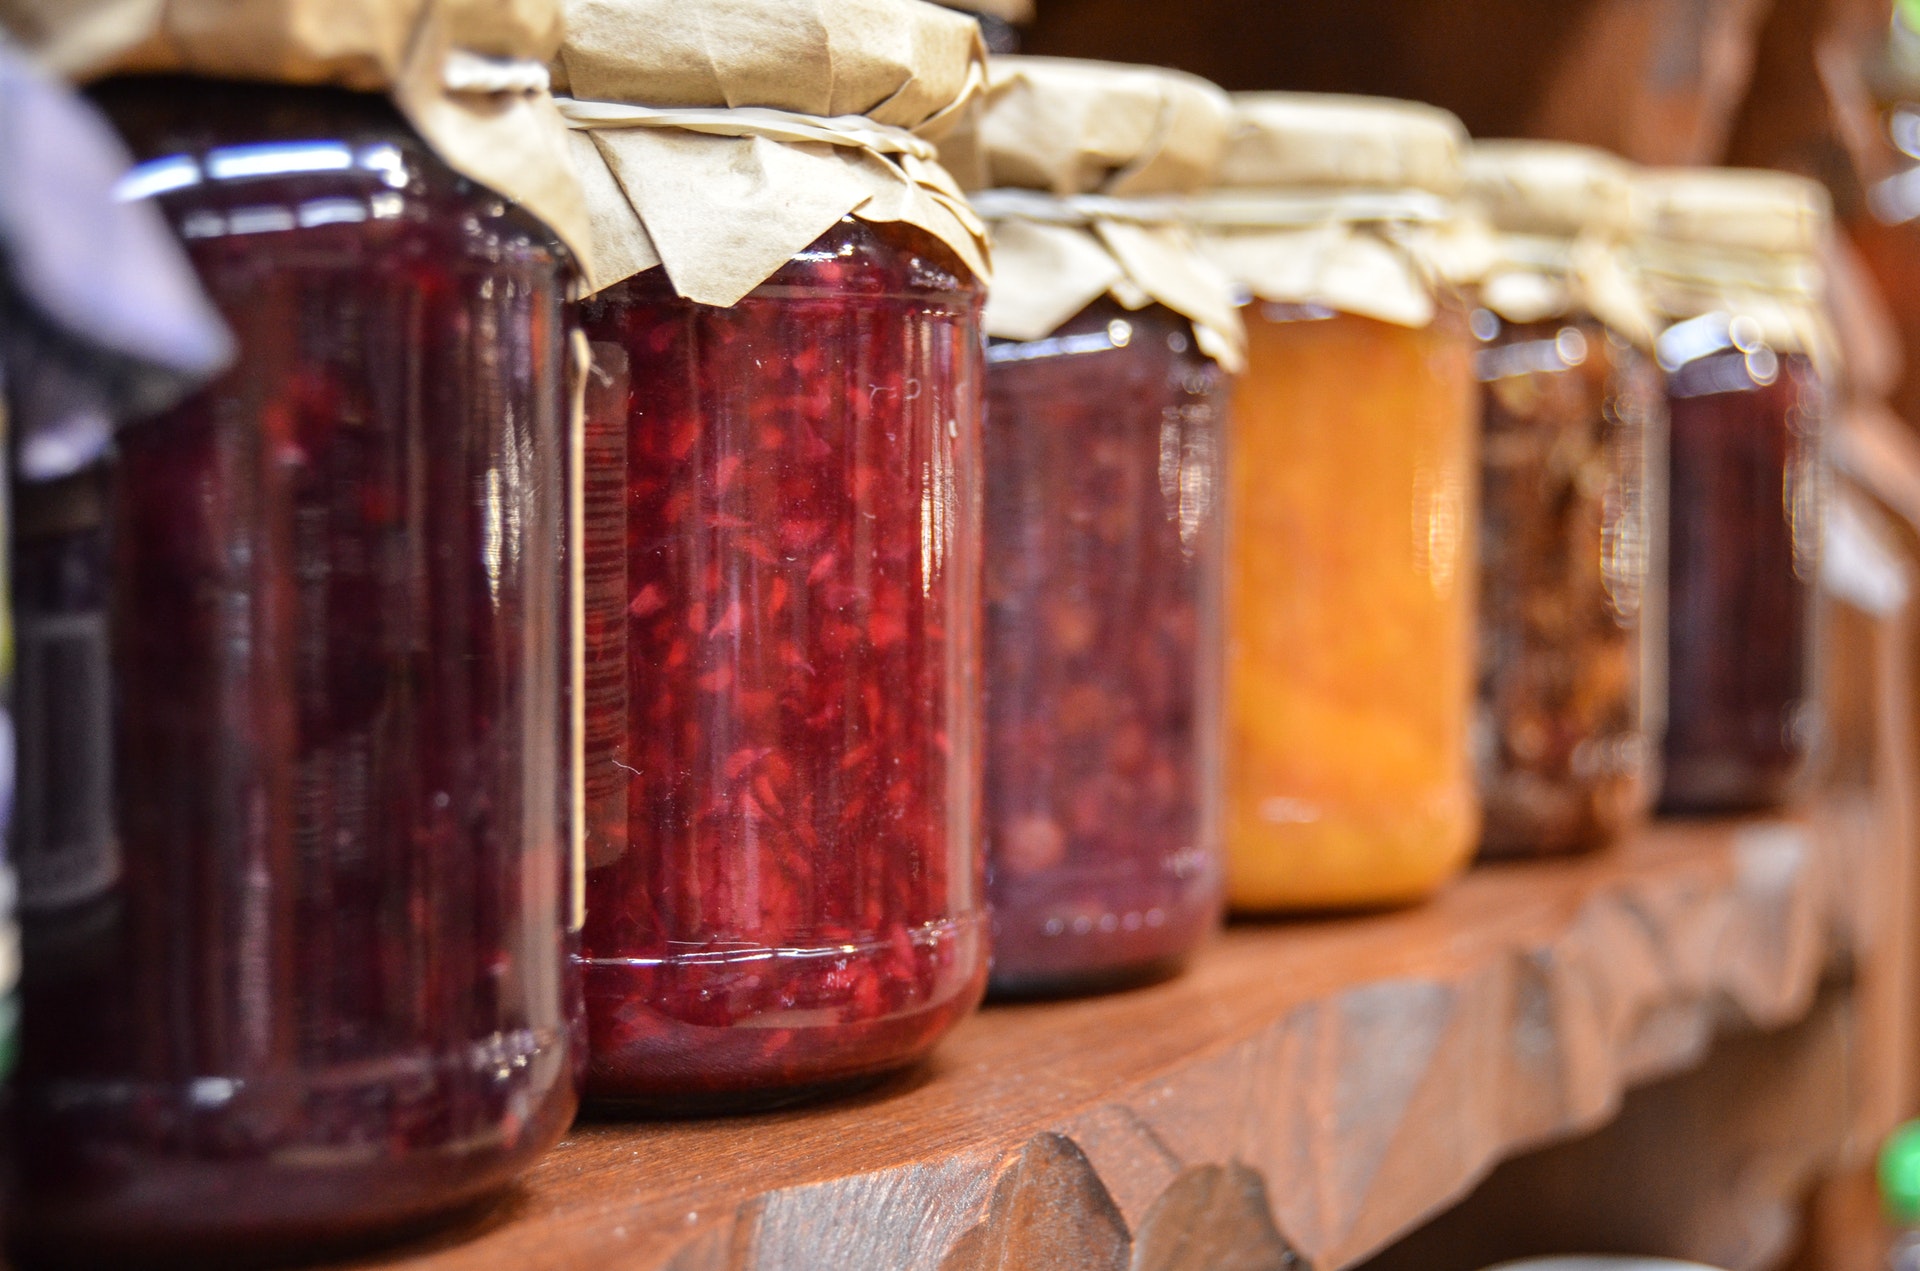 Home canning and recipe class set Oct. 15 in Waco